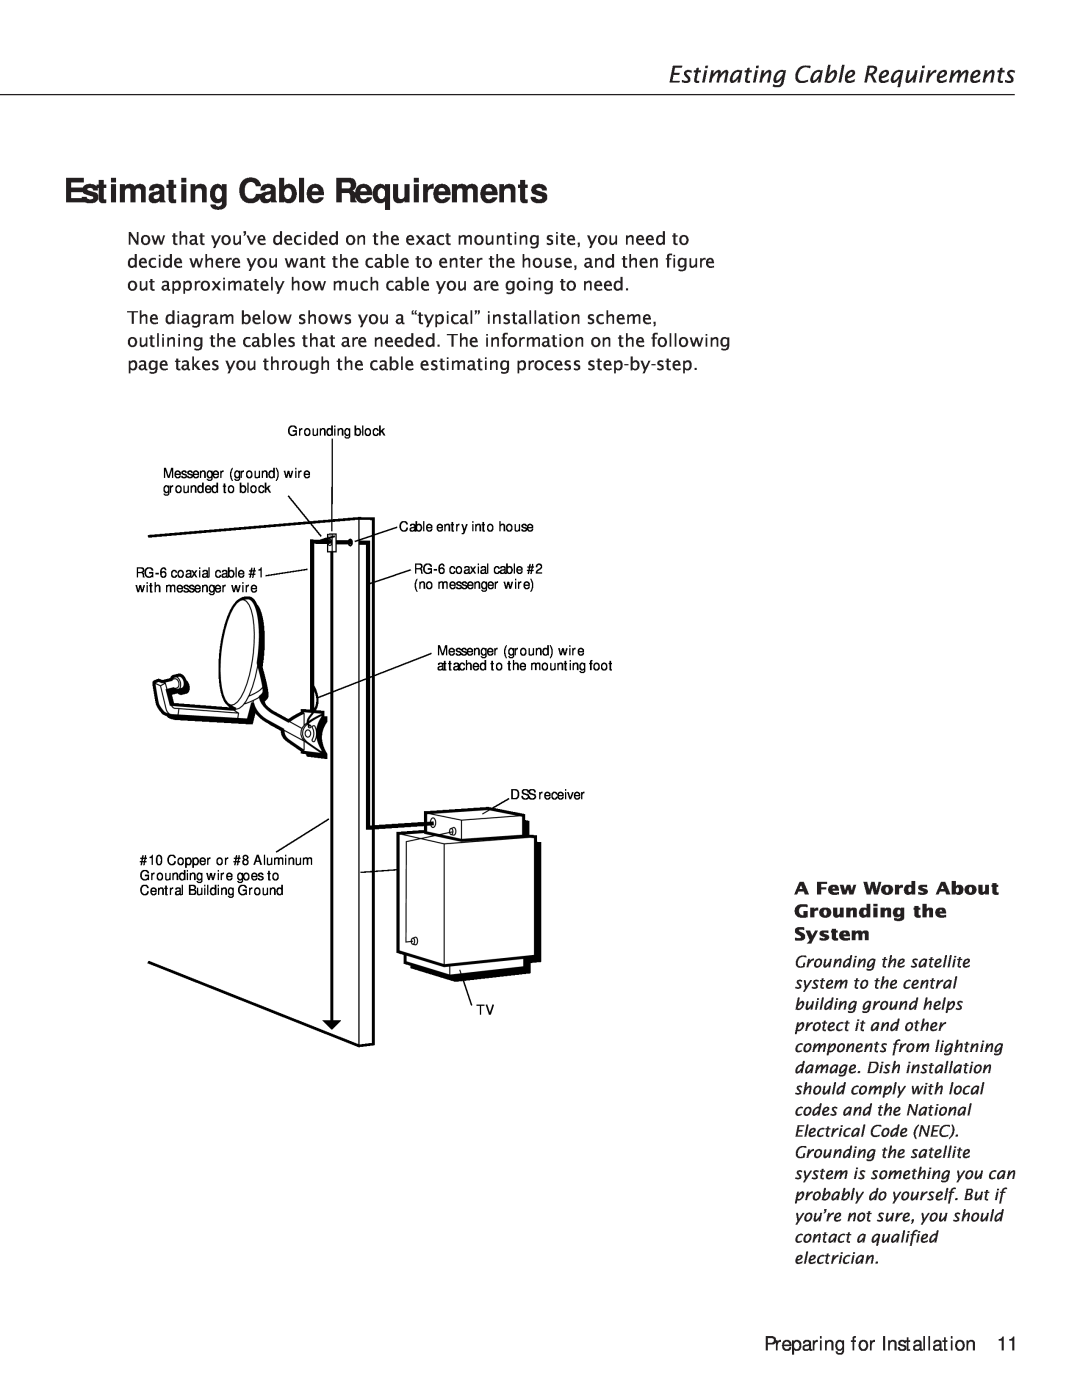 RCA Satellite TV Antenna manual Estimating Cable Requirements, Preparing for Installation 